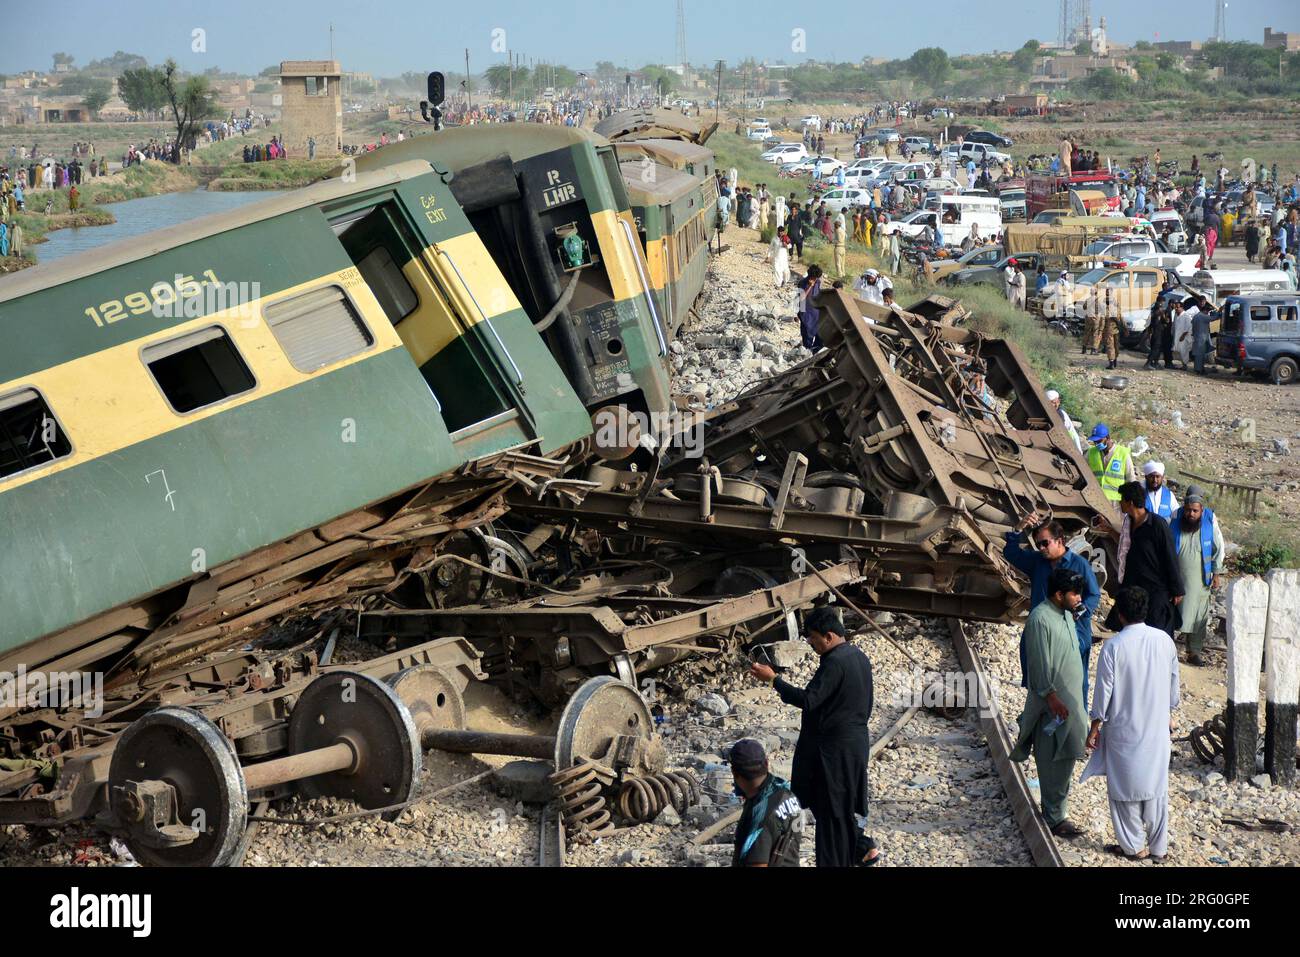 (230807) -- SANGHAR, Aug. 7, 2023 (Xinhua) -- People gather near derailed coaches of a passenger train in Sanghar district of Pakistan's southern Sindh province, on Aug. 6, 2023. At least 22 people were killed and over 50 others injured on Sunday after a passenger train derailed in the Sanghar district of Pakistan's southern Sindh province, local police said.The accident took place when 10 coaches of the Hazara Express train derailed when it was crossing a canal bridge near Sarhari town in the Shahdadpur area of the district, Muhammad Younis Chandio, deputy inspector general of police of the r Stock Photo